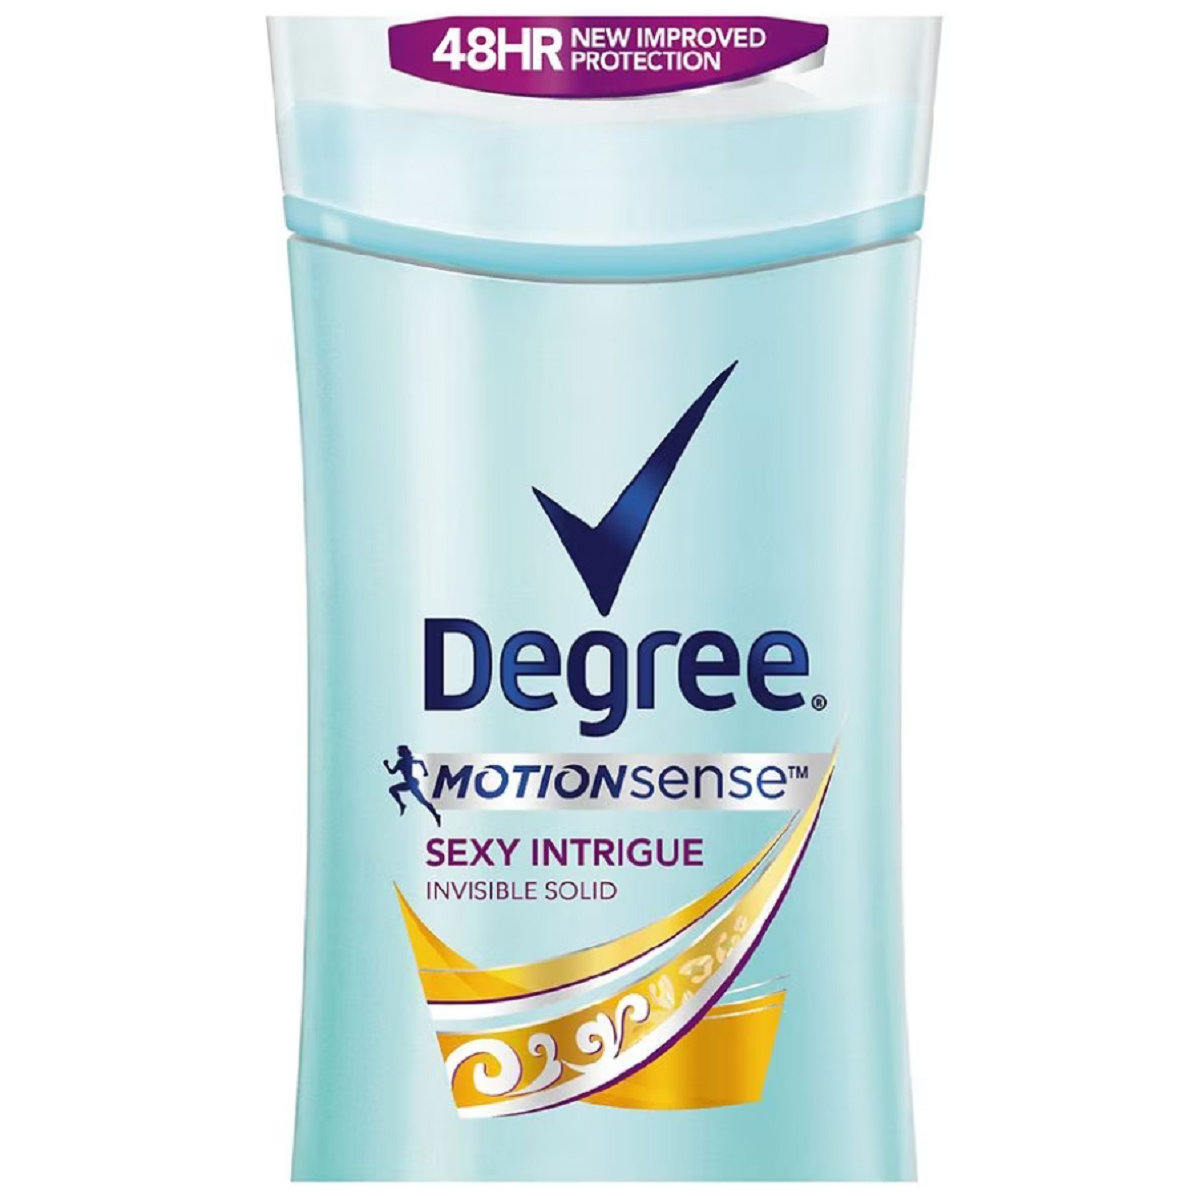 $2 Off Any (1) Degree Antiperspirant or Deodorant Product Coupon